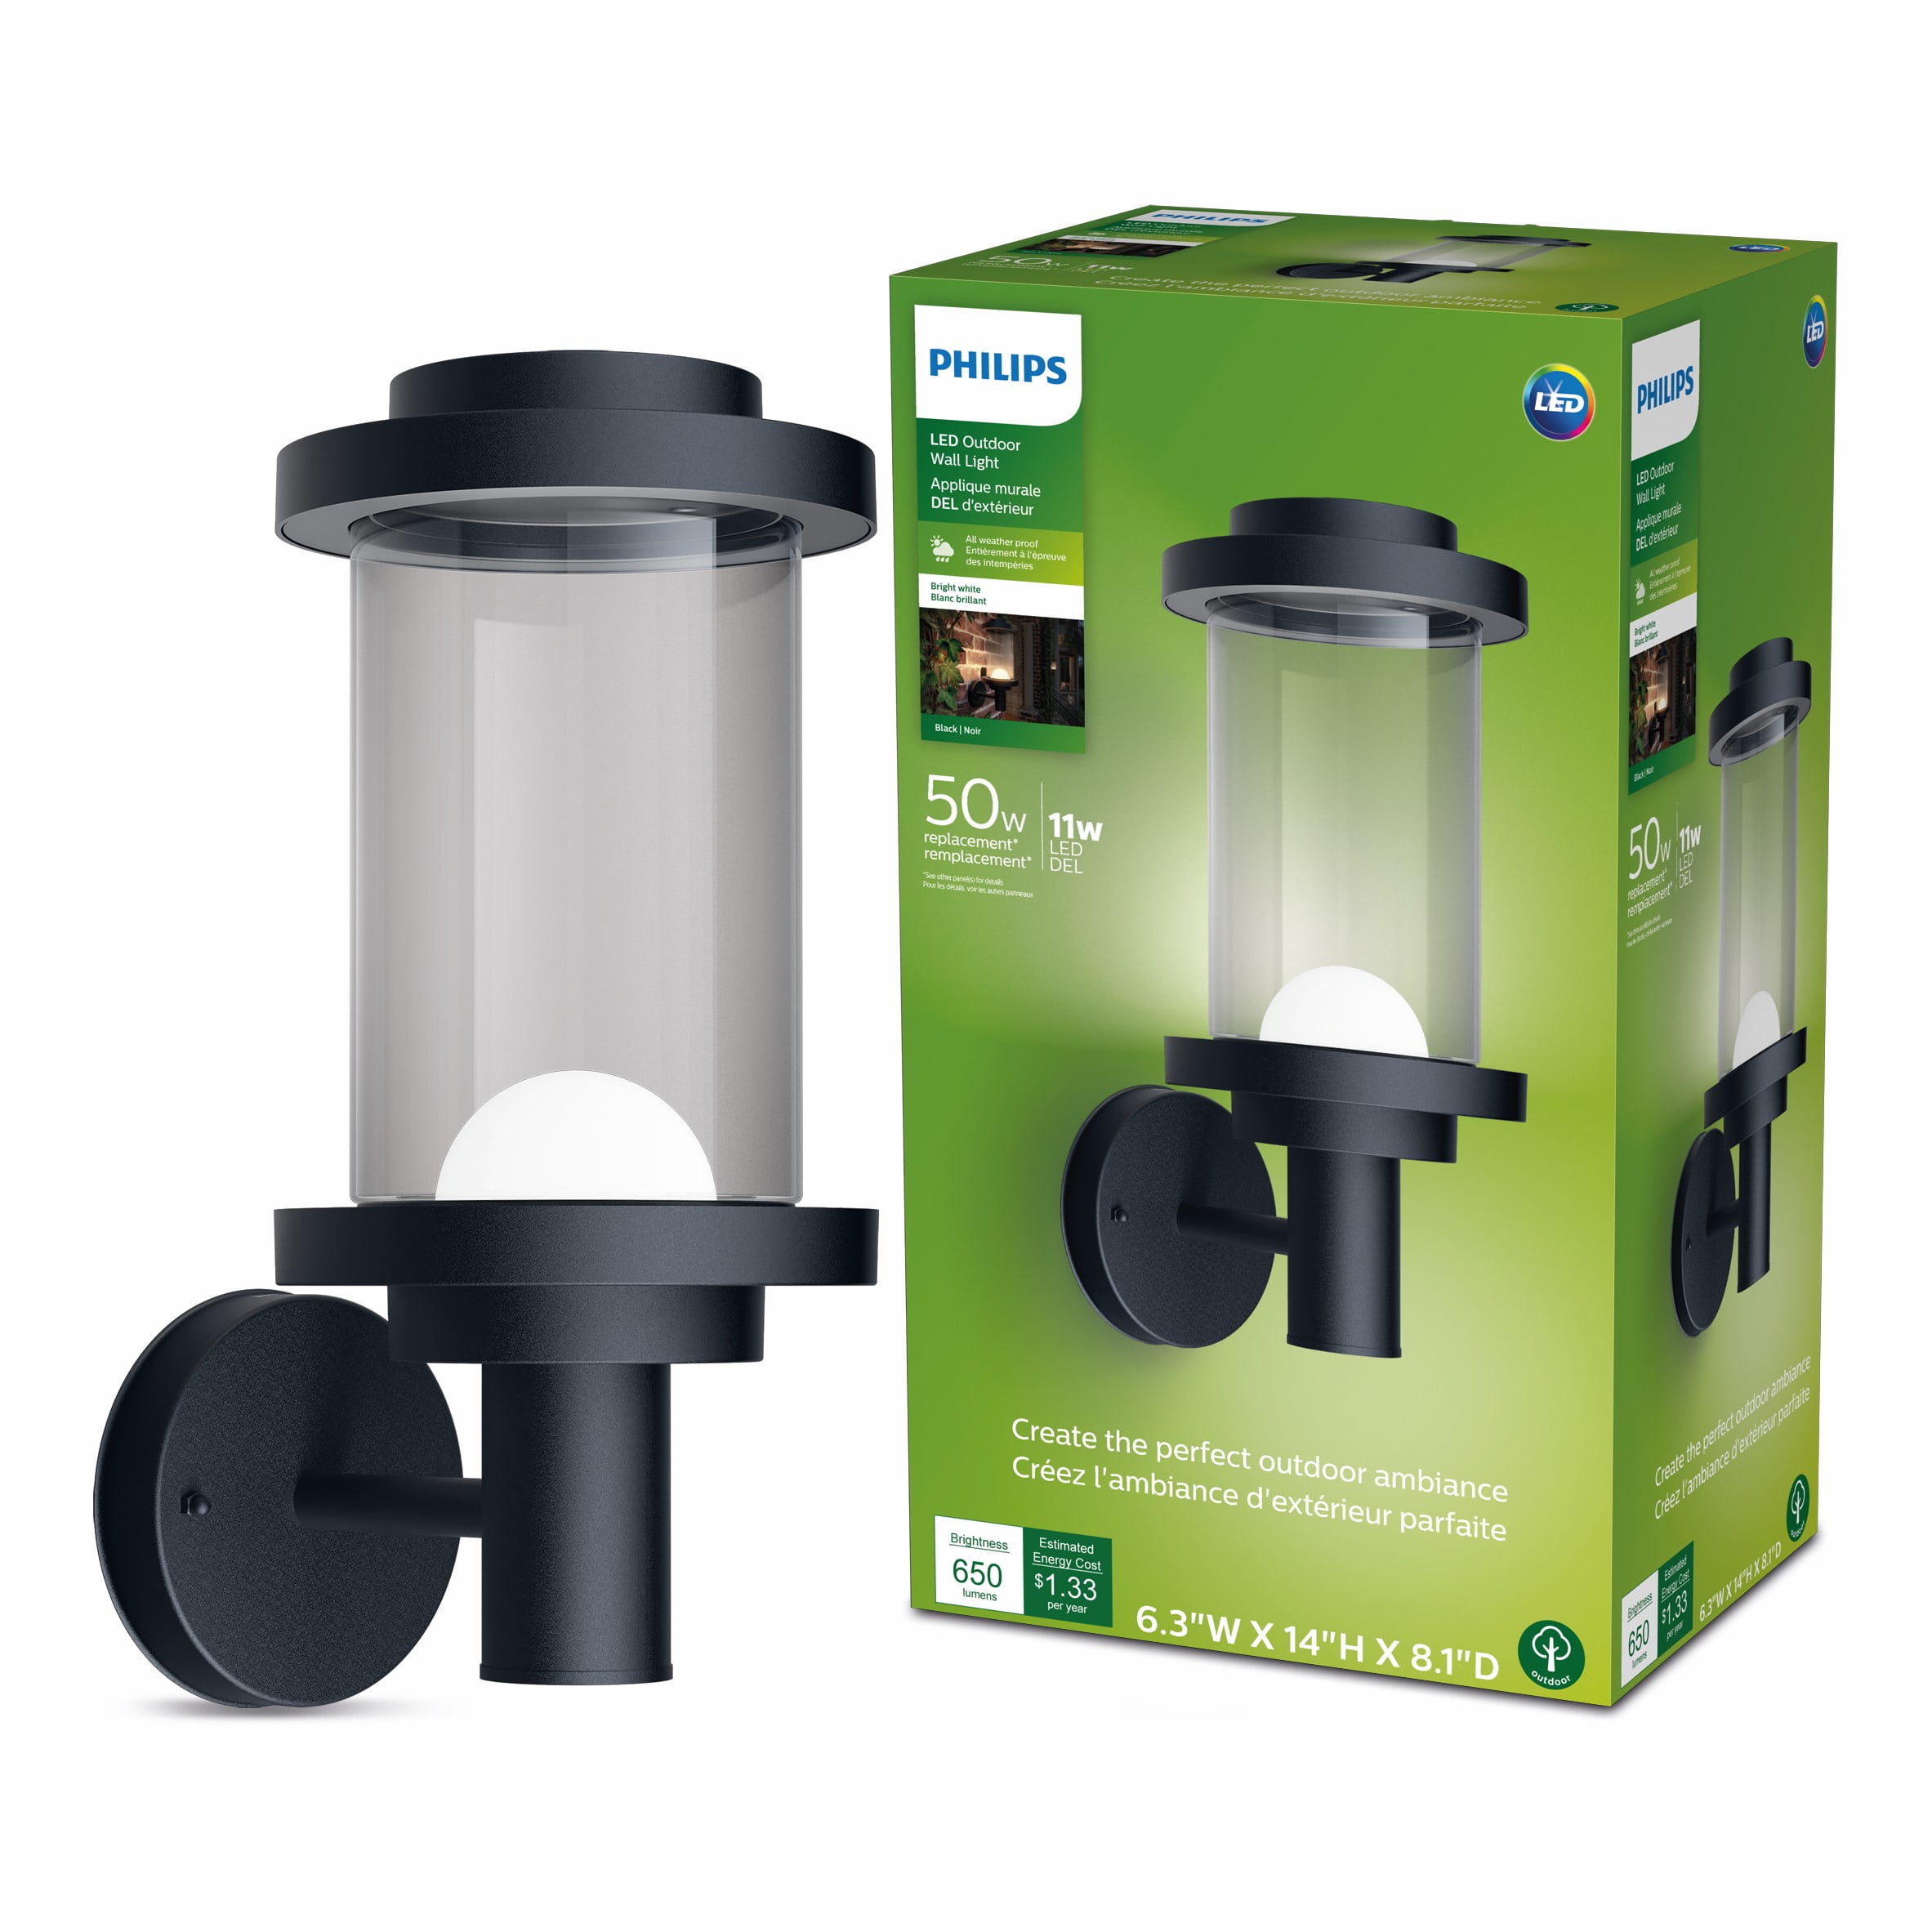 Philips Outdoor Bright White LED Wall Light Cylinder Sconce (50-Watt/650 Lumens Equivalent, Black) $11.89  + Free S&H w/ Walmart+ or $35+